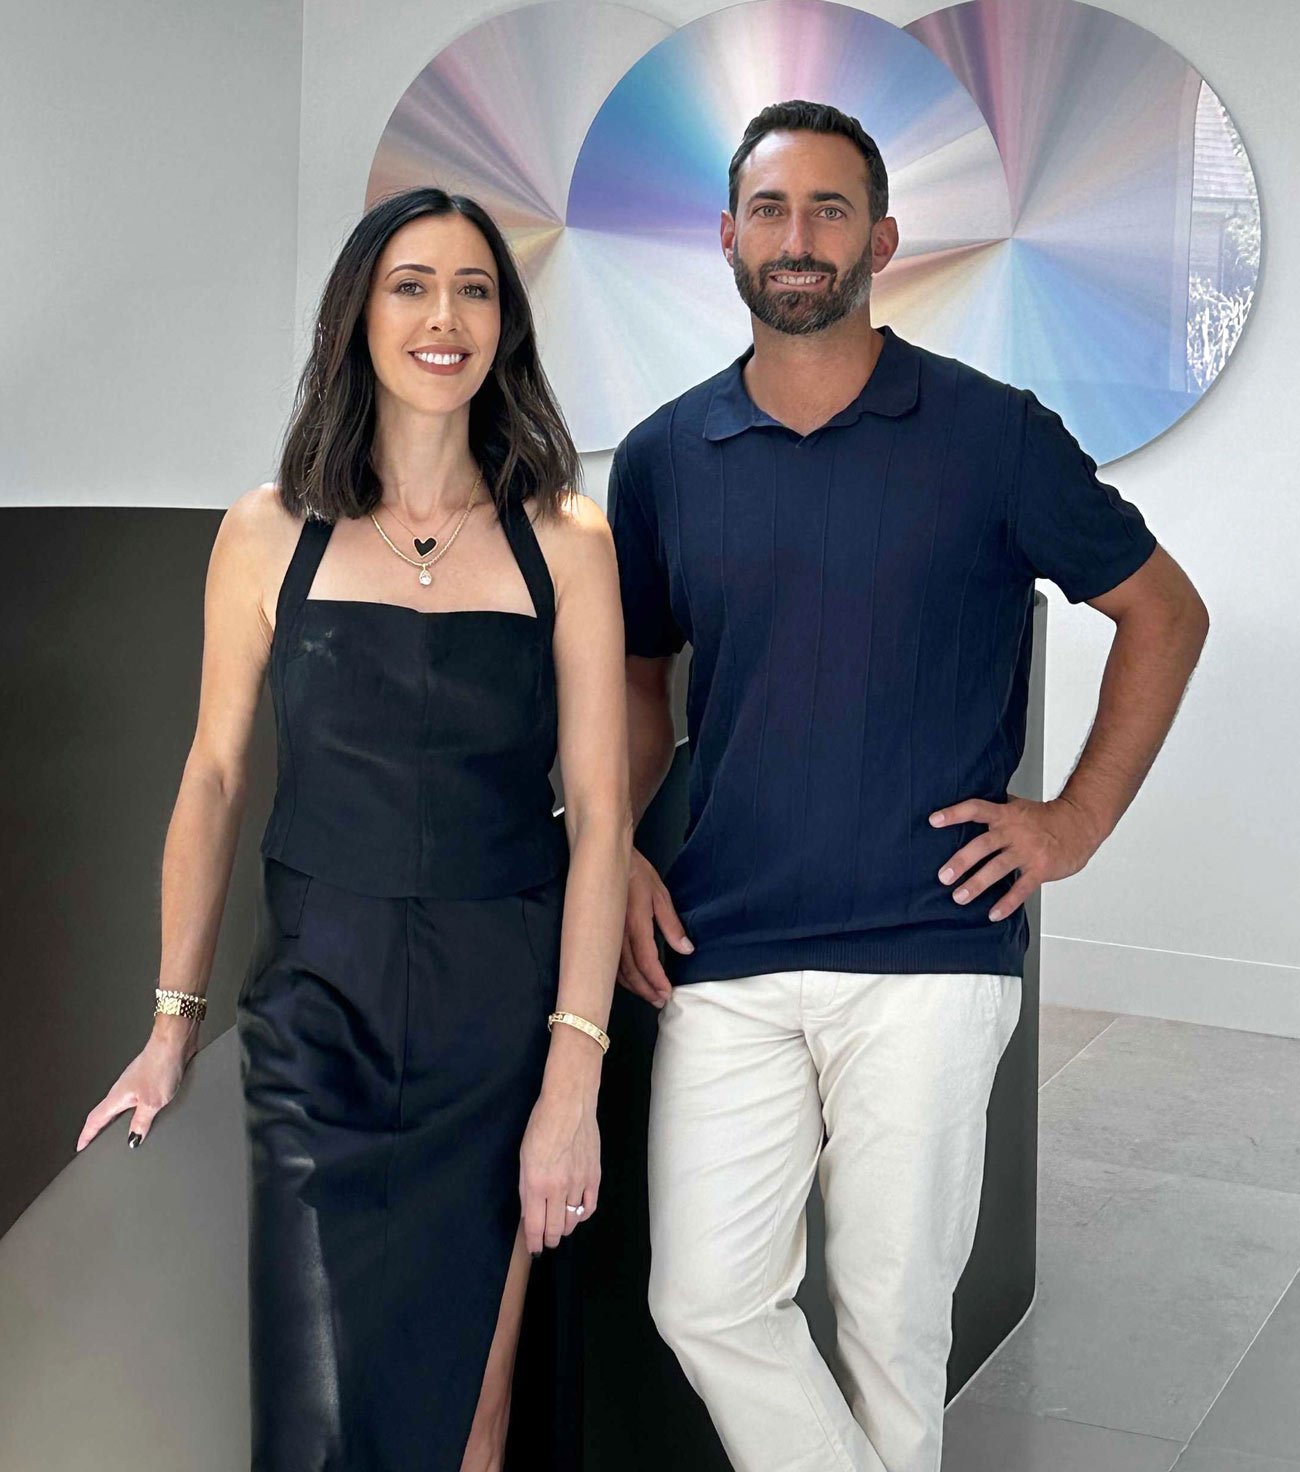 Nina Maya and Colin Sternberg stand side by side in front of an abstract, iridescent wall art piece. Nina, on the left, is wearing a sleeveless black dress with a subtle sweetheart neckline and bracelets on both wrists. Colin, on the right, sports a dark blue collared shirt with rolled-up sleeves and off-white pants. They are both smiling subtly and appear relaxed.